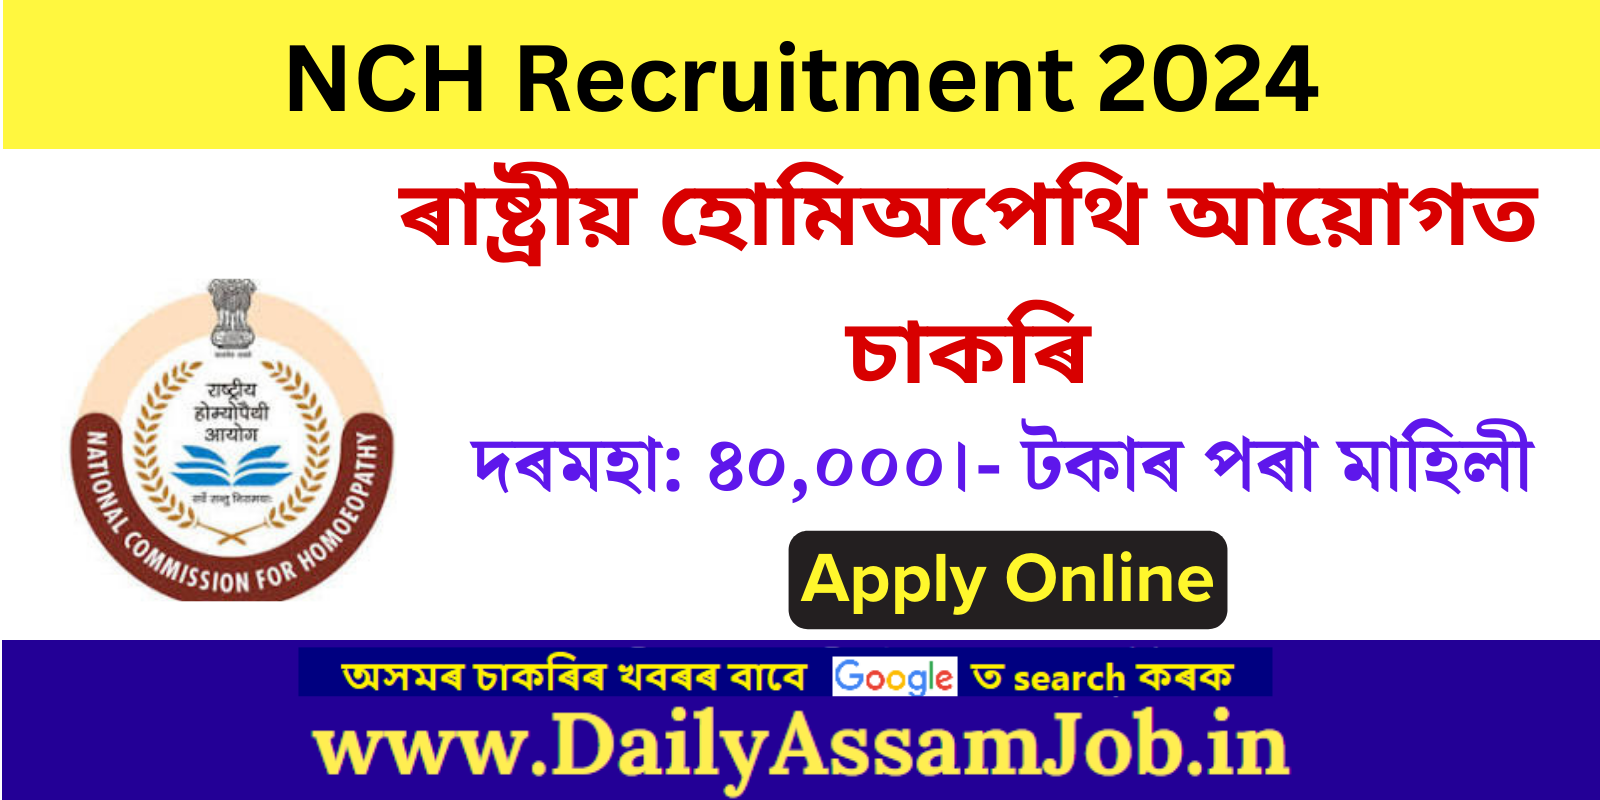 National Commission for Homeopathy (NCH) Recruitment 2024